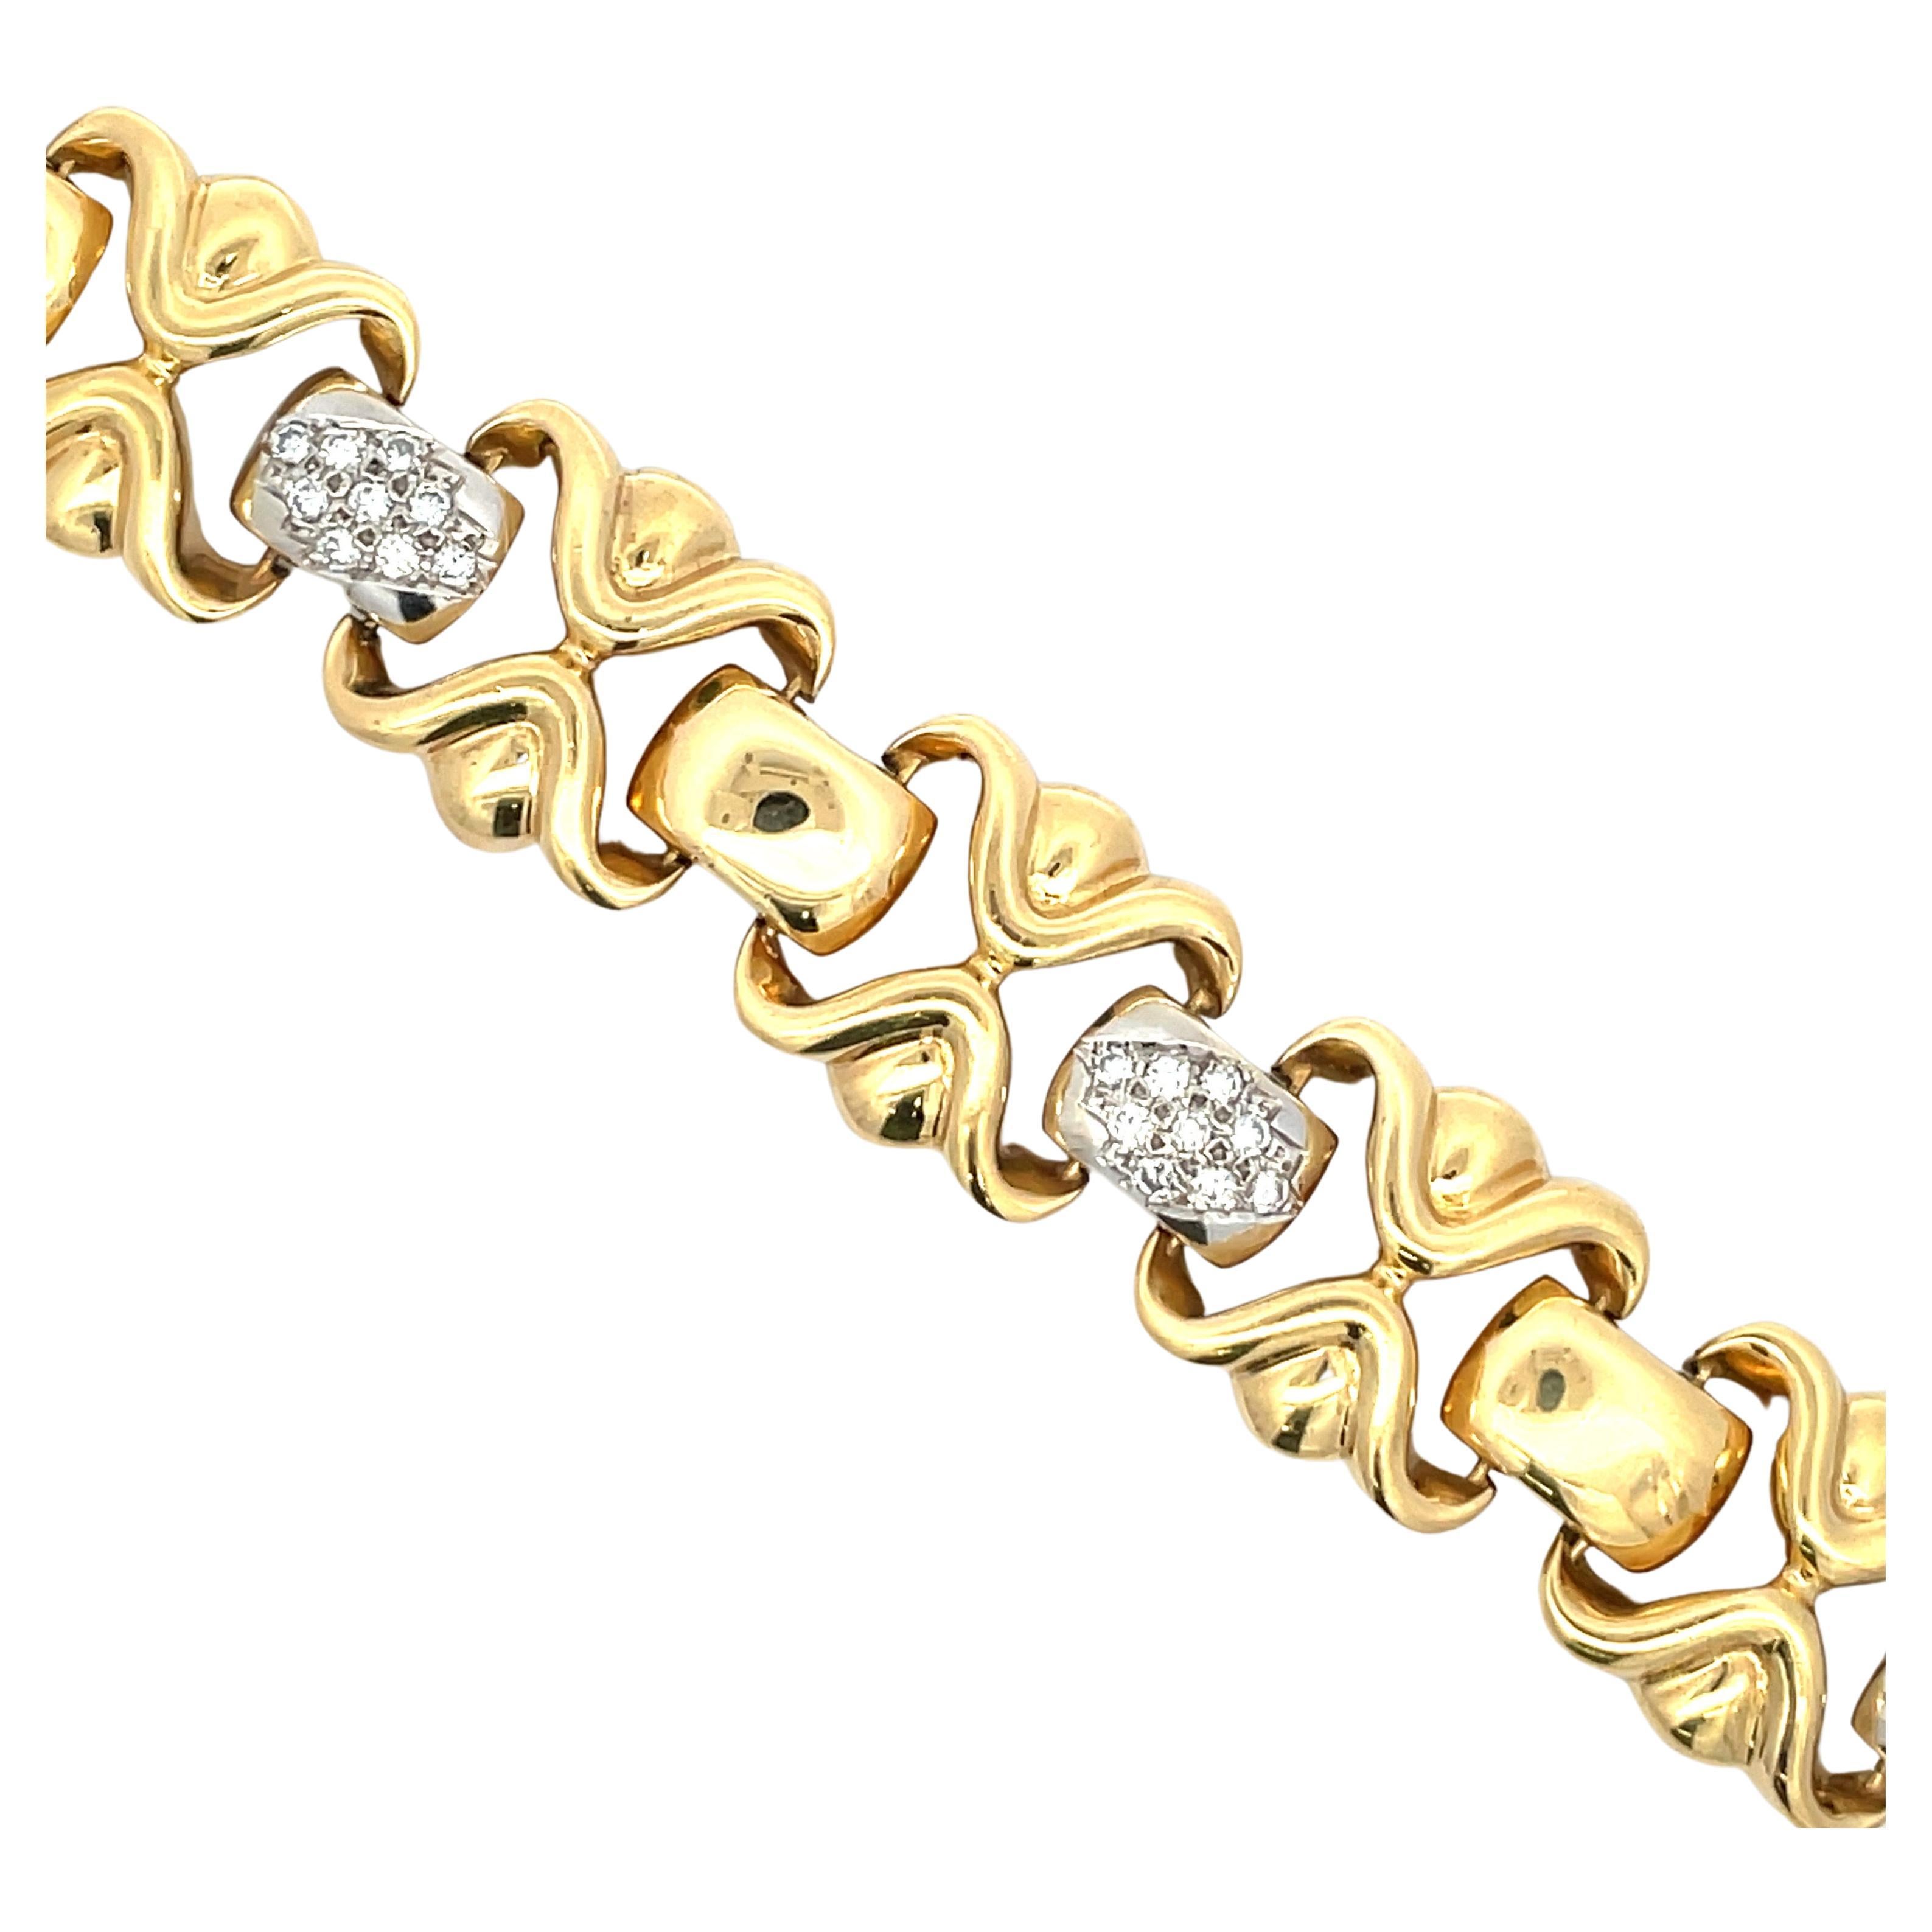 Contemporary Diamond Bar Link Bracelet 1.80 Carats 18K Yellow Gold Made In Italy 63 Grams For Sale